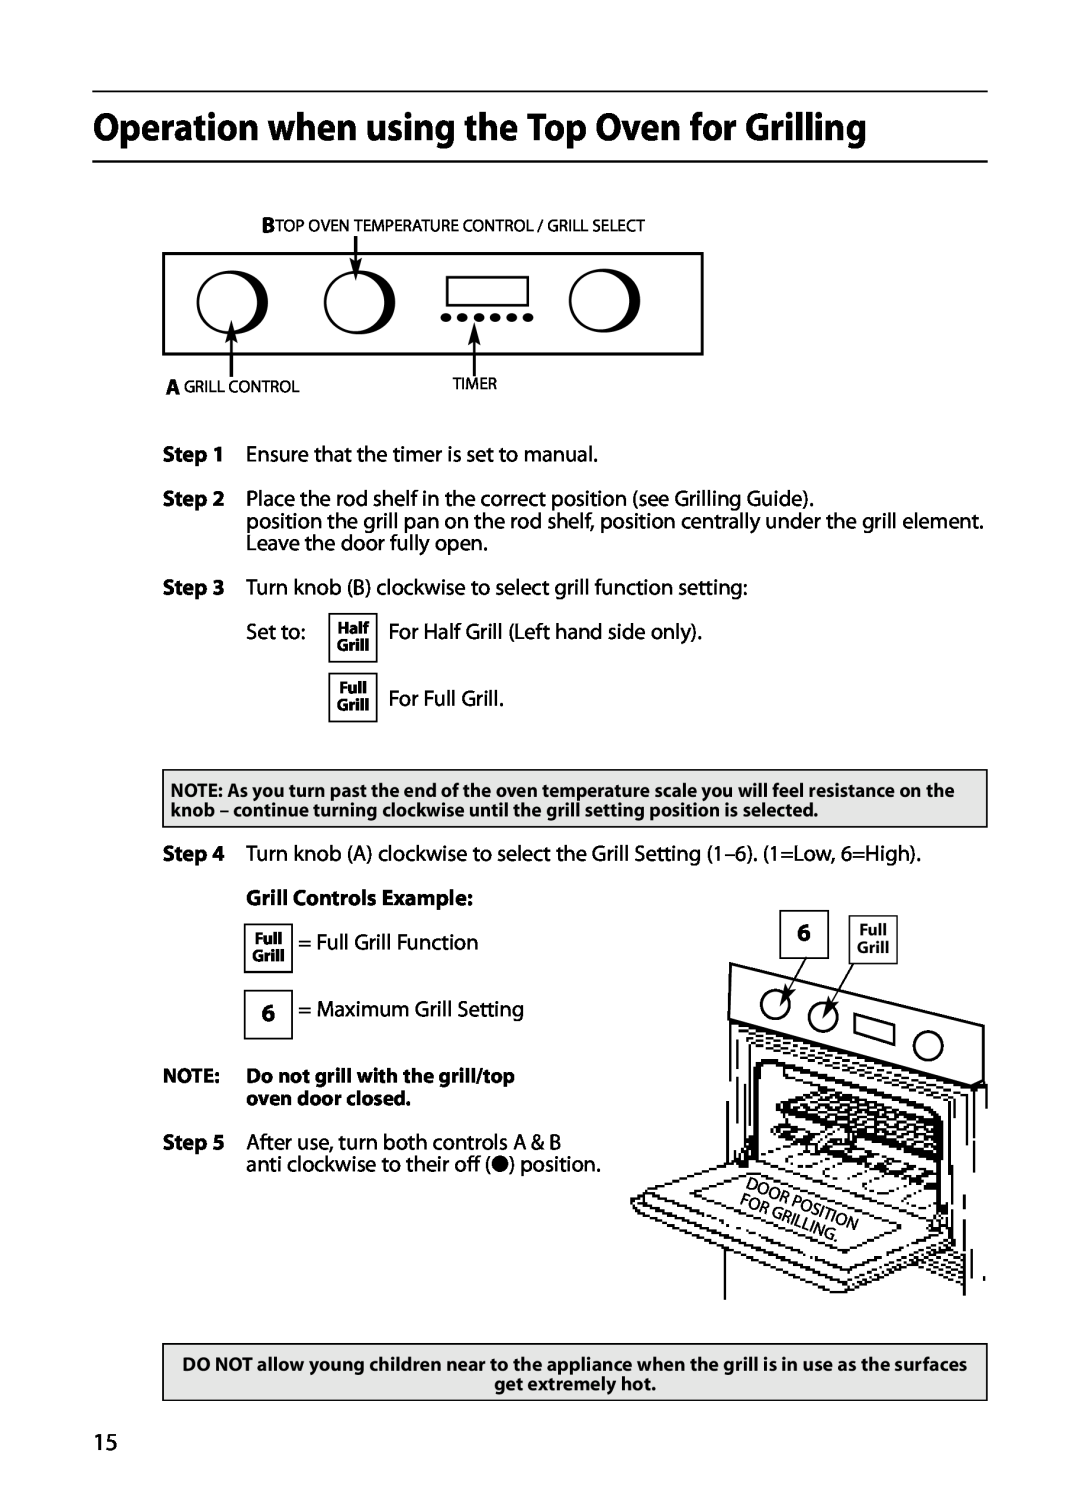 Hotpoint S420E manual Operation when using the Top Oven for Grilling, Grill Controls Example, = Full Grill Function 